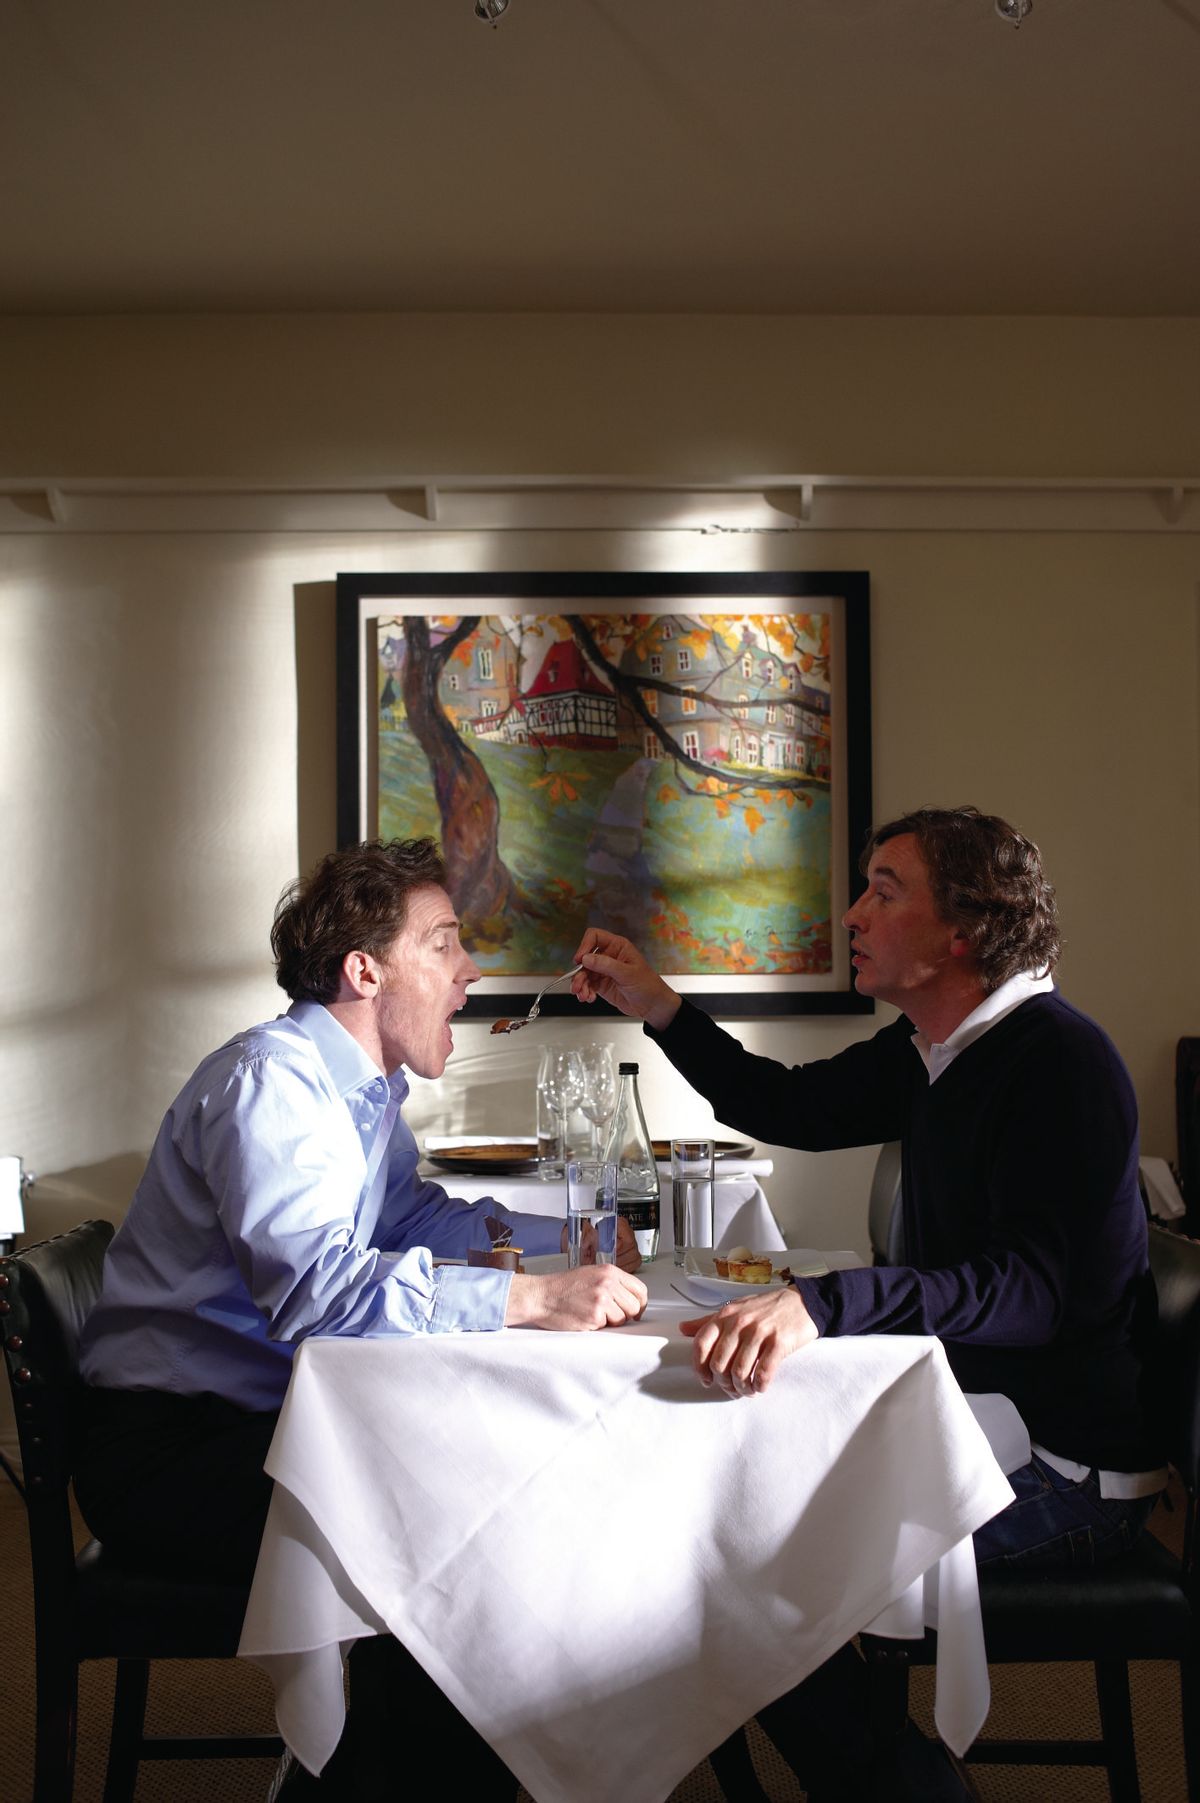 Rob Brydon (left) and Steve Coogan in "The Trip."